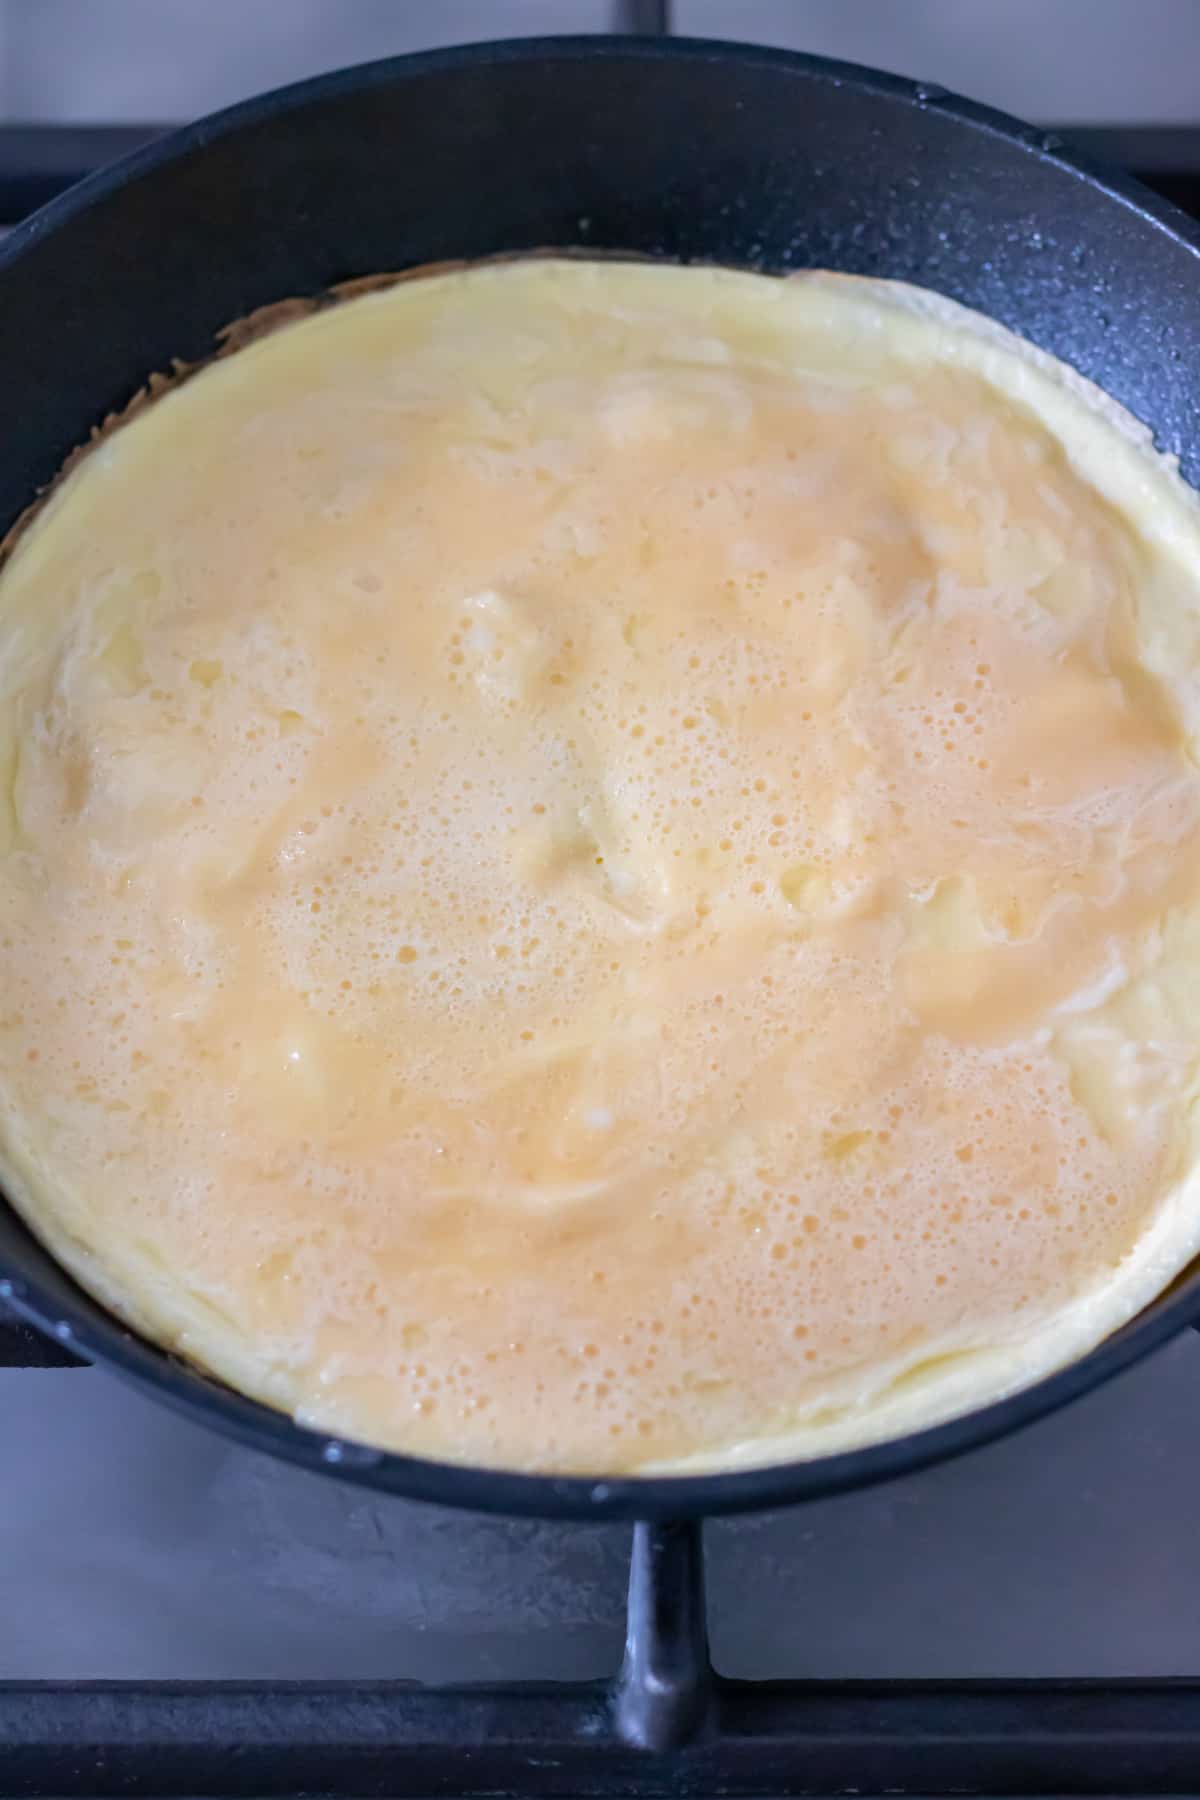 Partially cooked omelet.